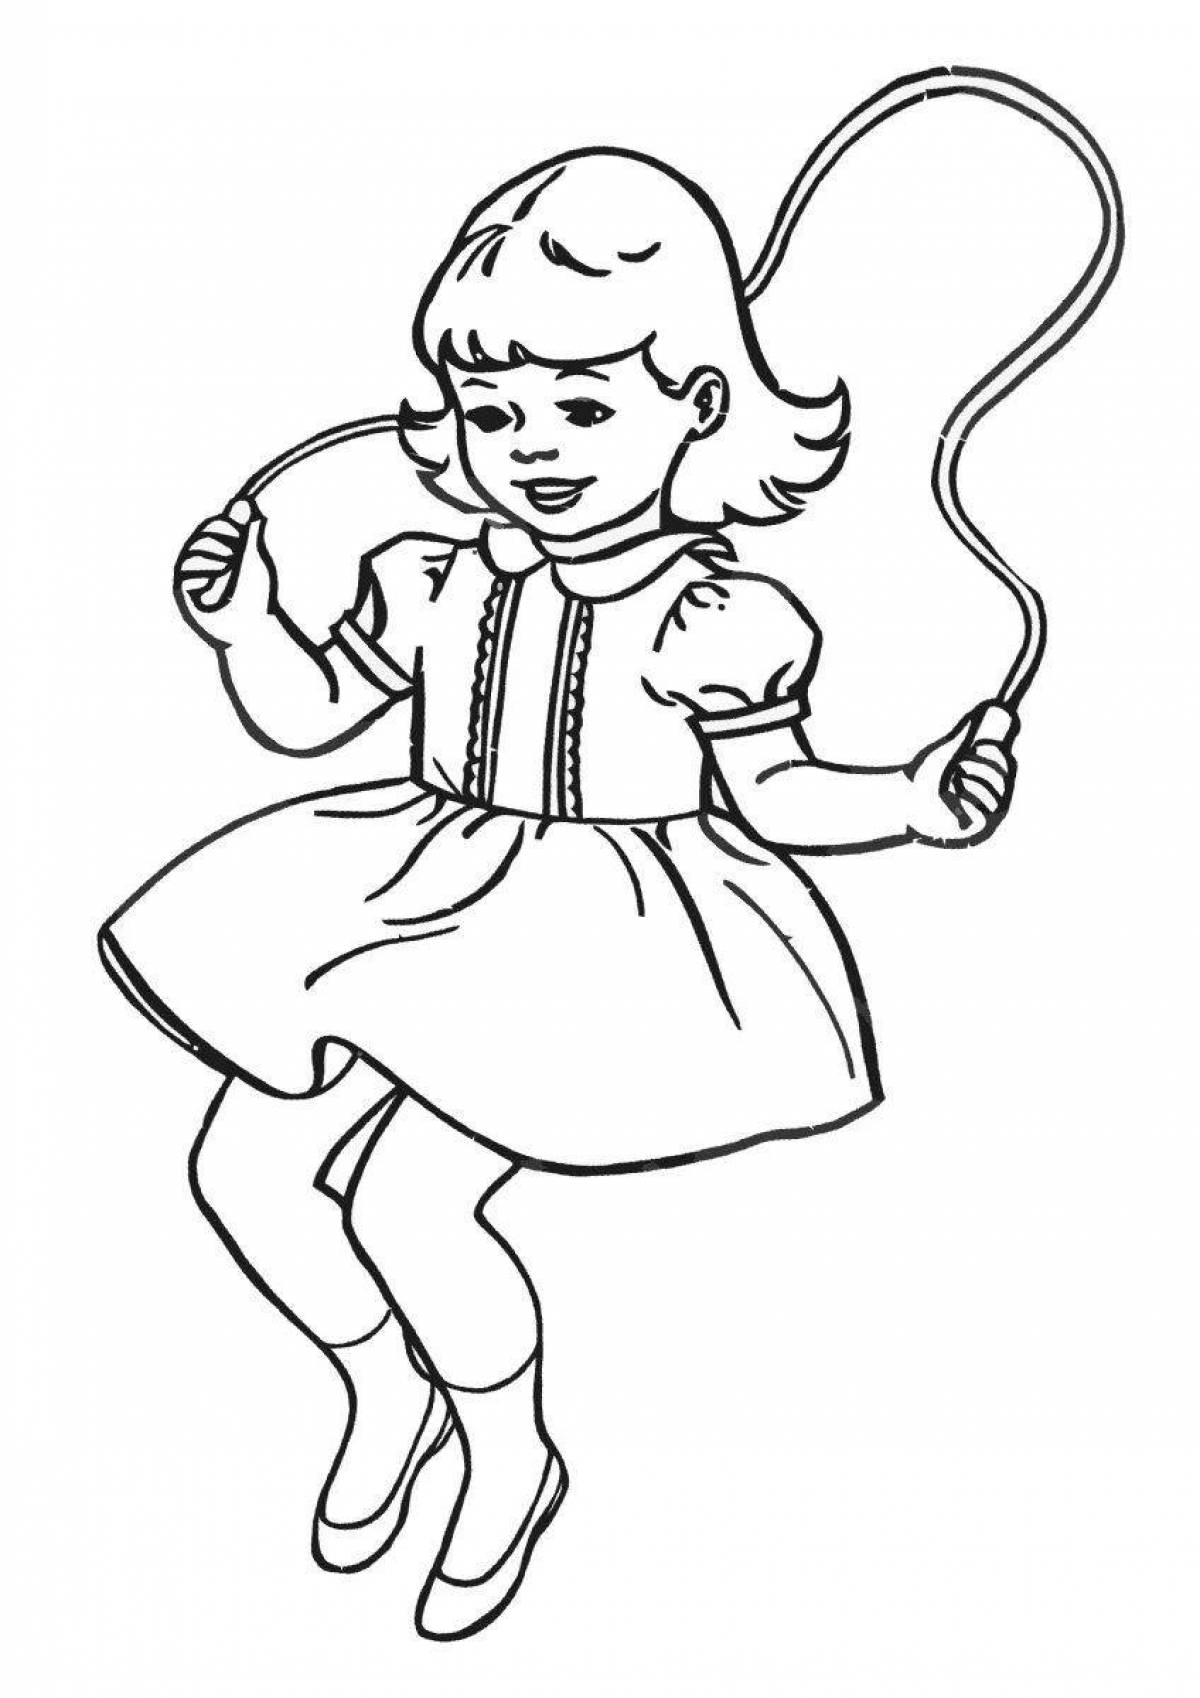 Animated jump rope coloring page